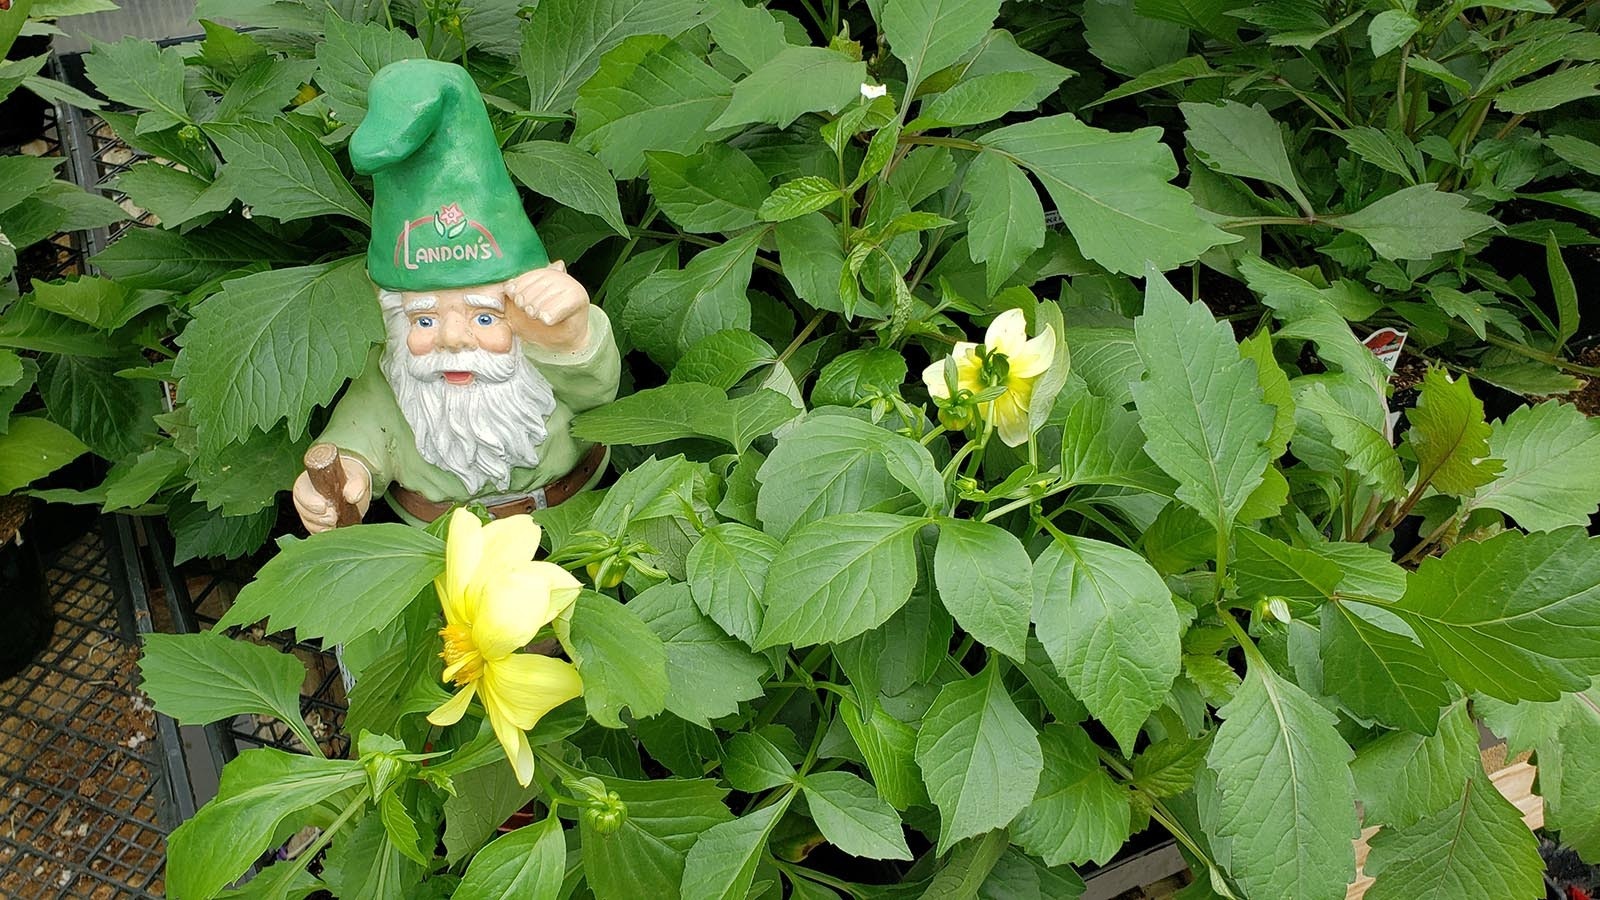 The official Landon's Greenhouse gnome.